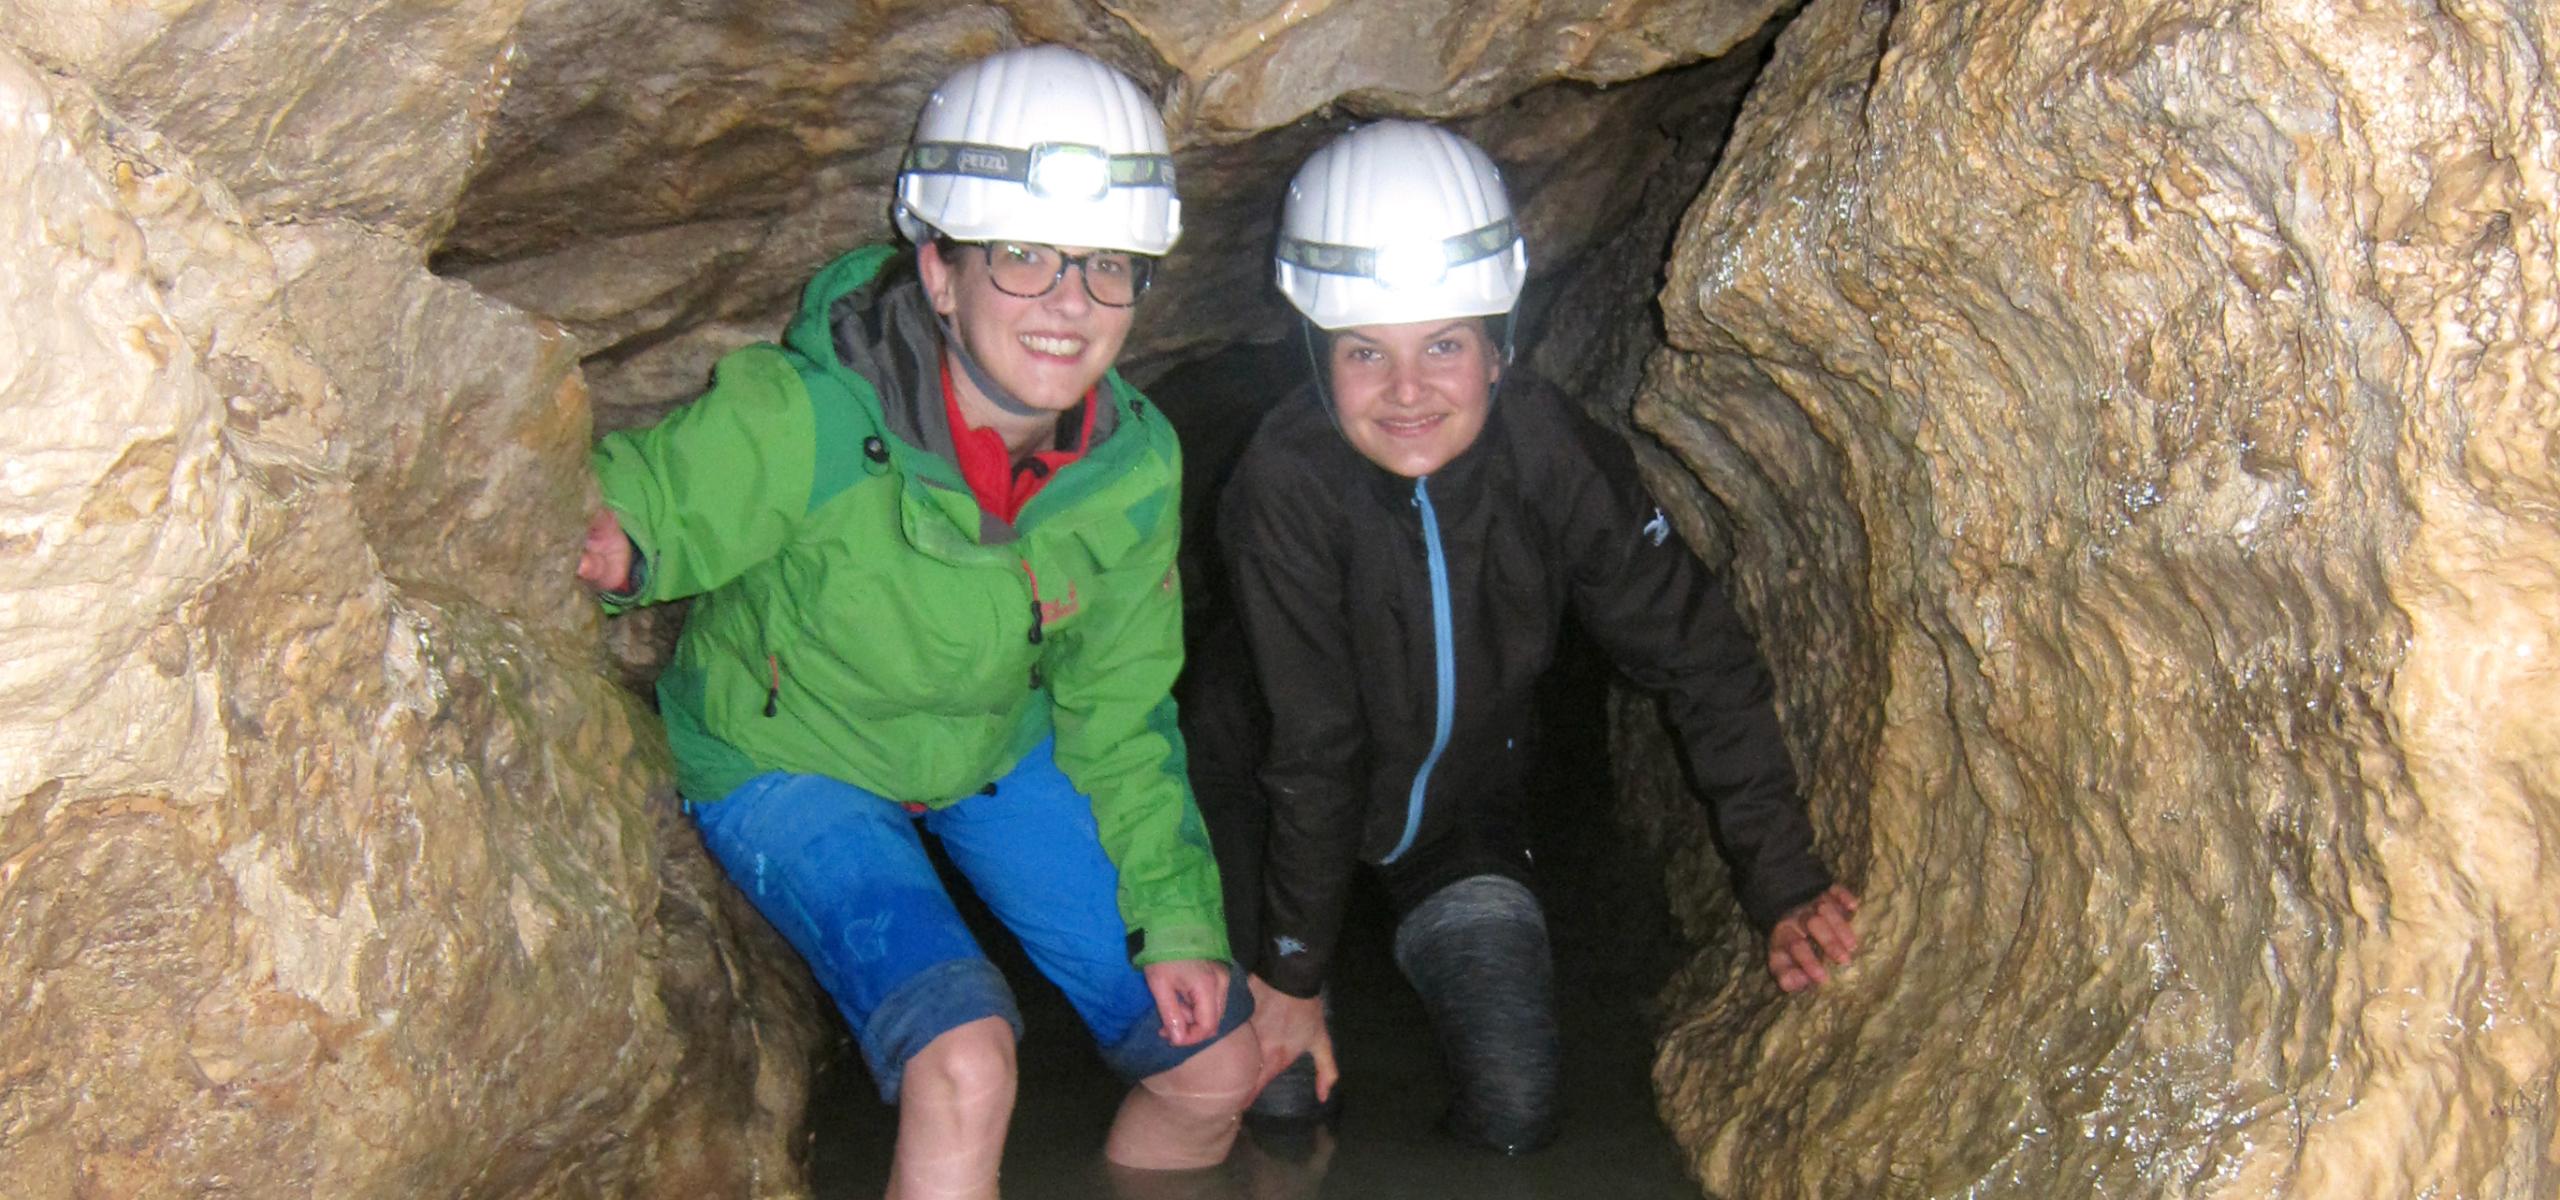 Two children wade knee-deep through the water in a cave passage